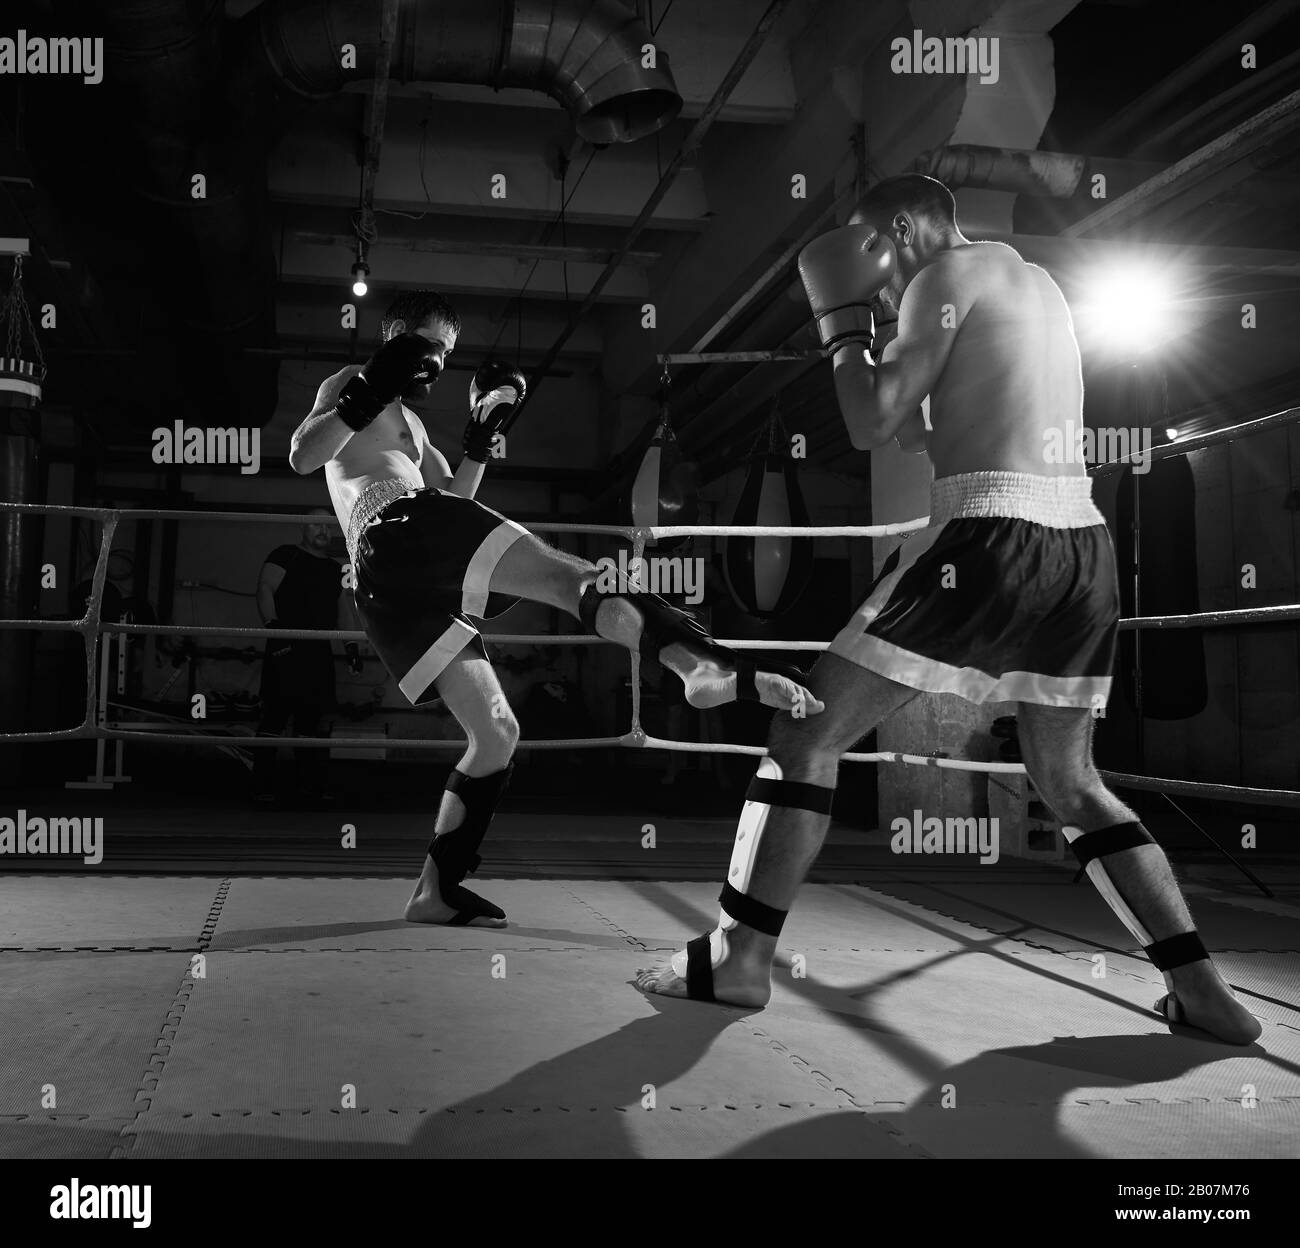 Kickboxing Black and White Stock Photos and Images image